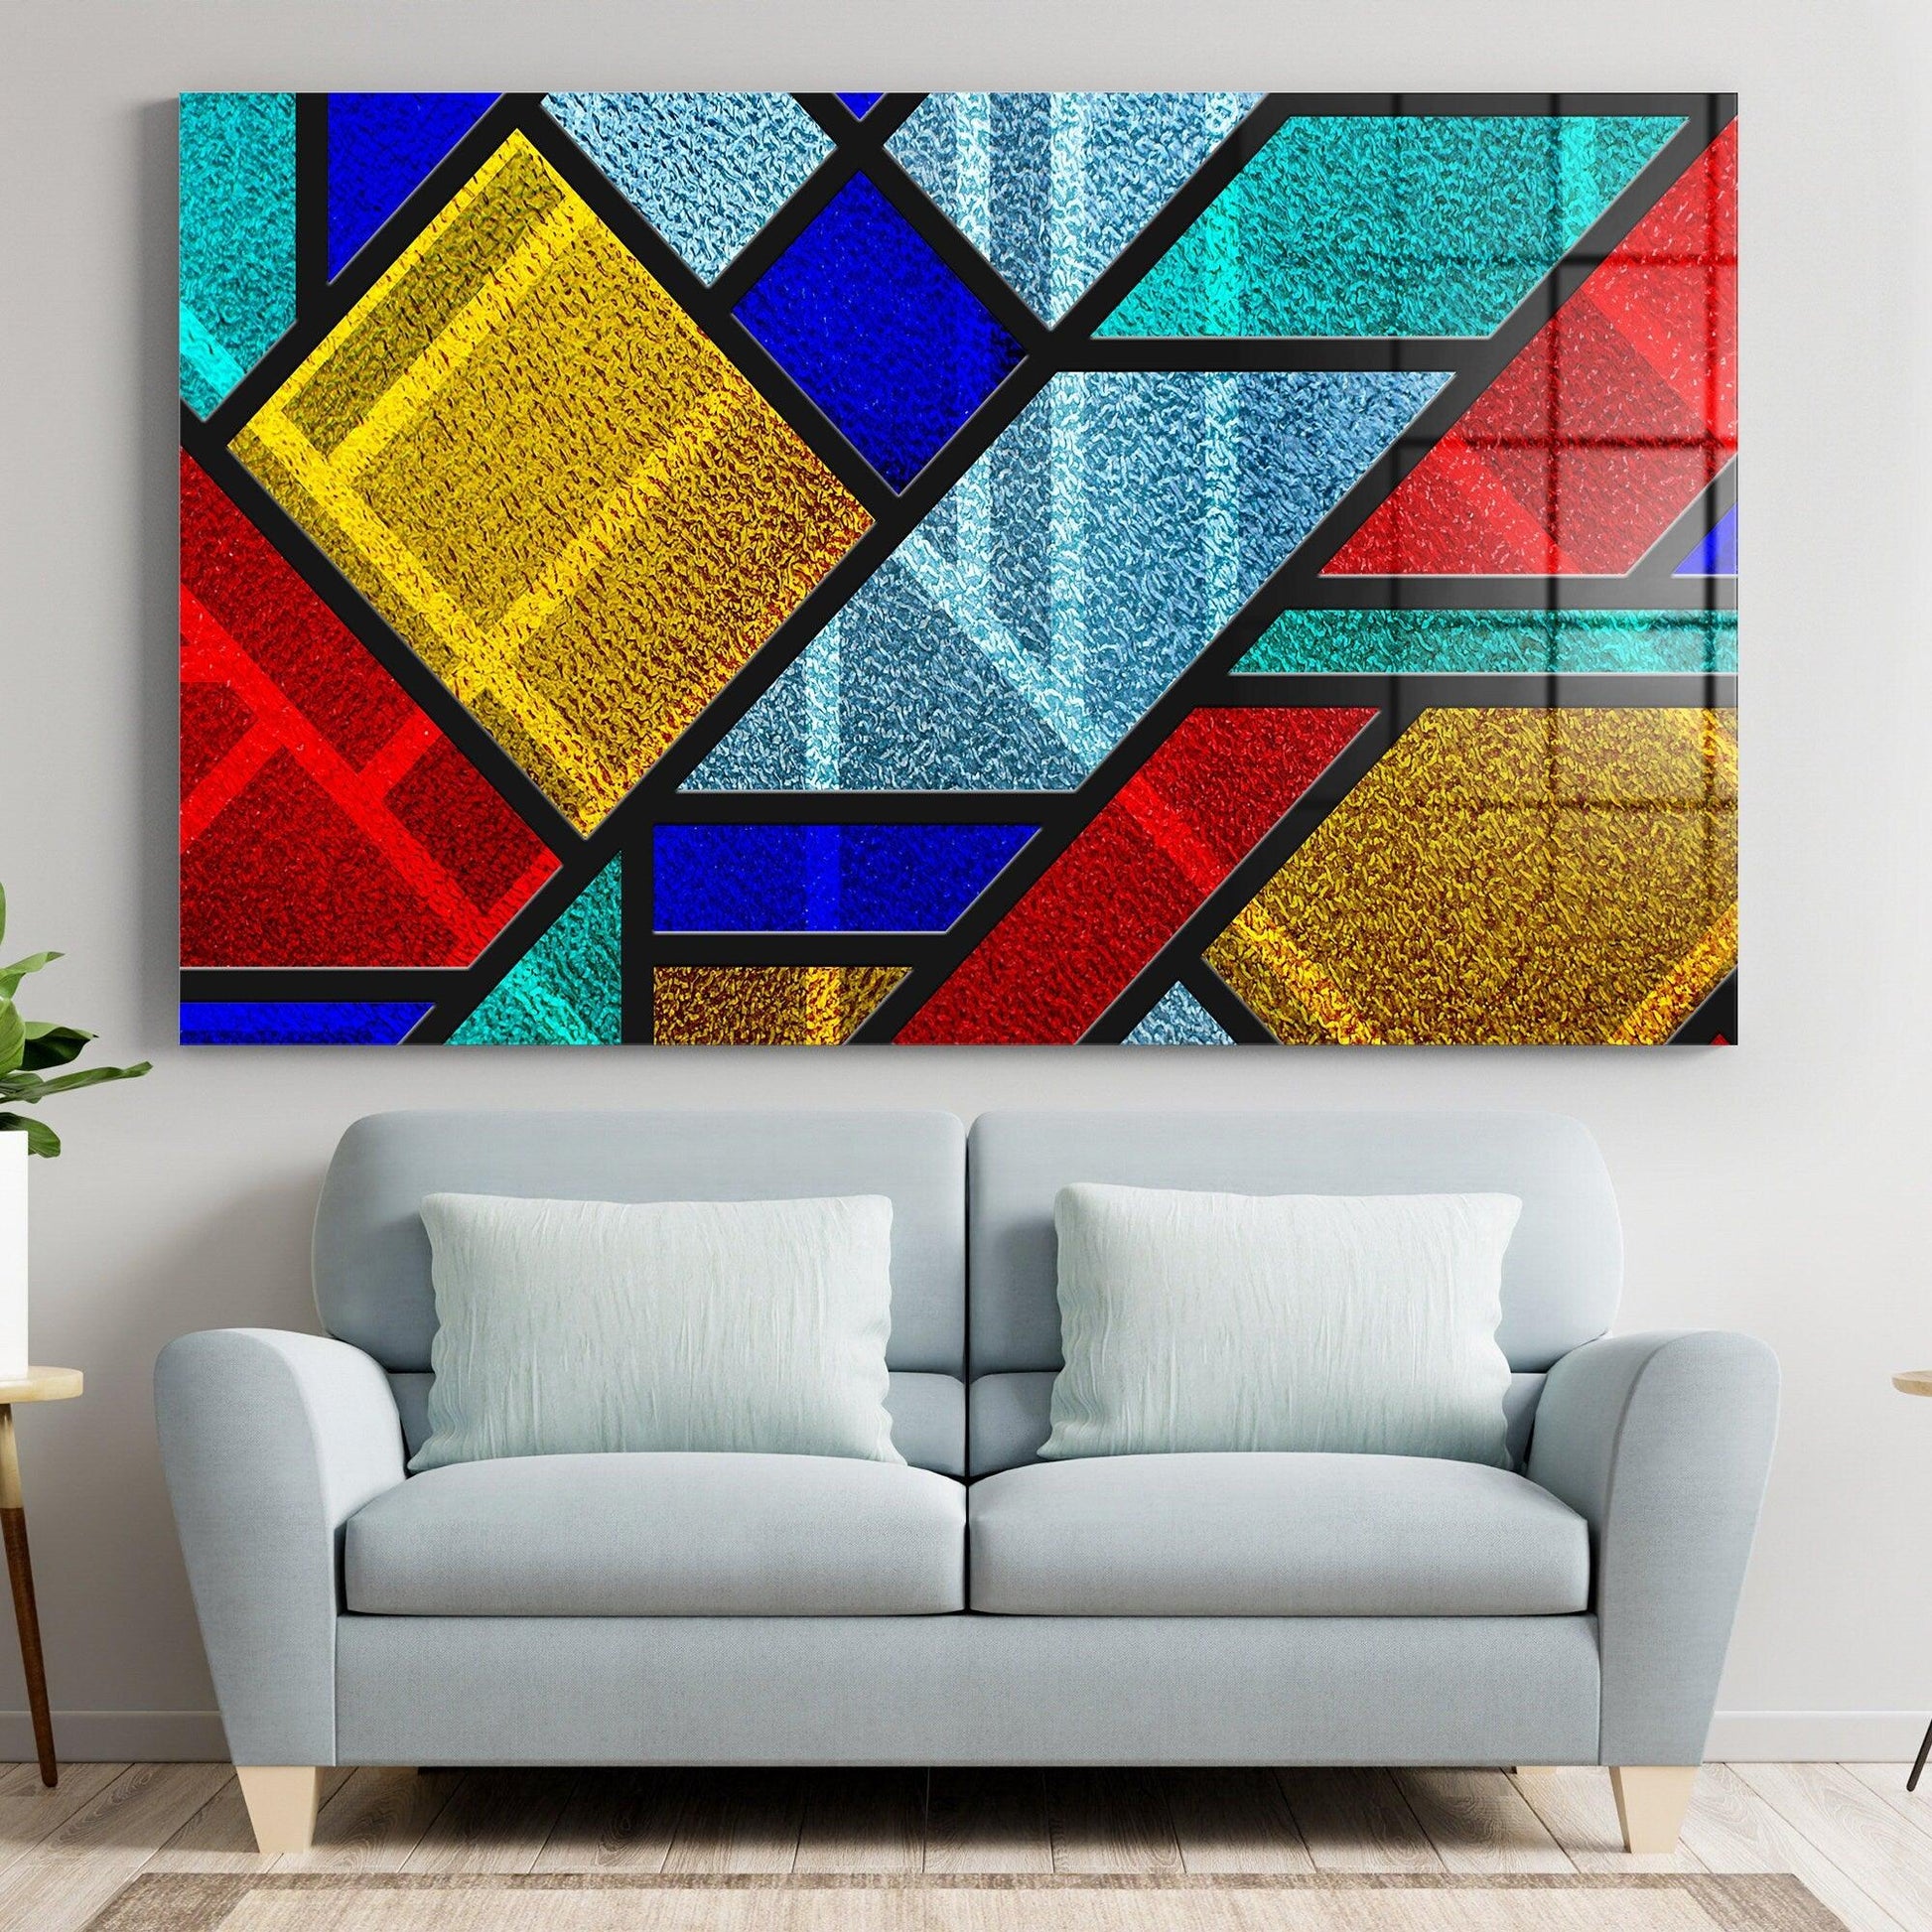 Stained Glass Canvas, Glass wall art, Modern wall decor, Set of stripe